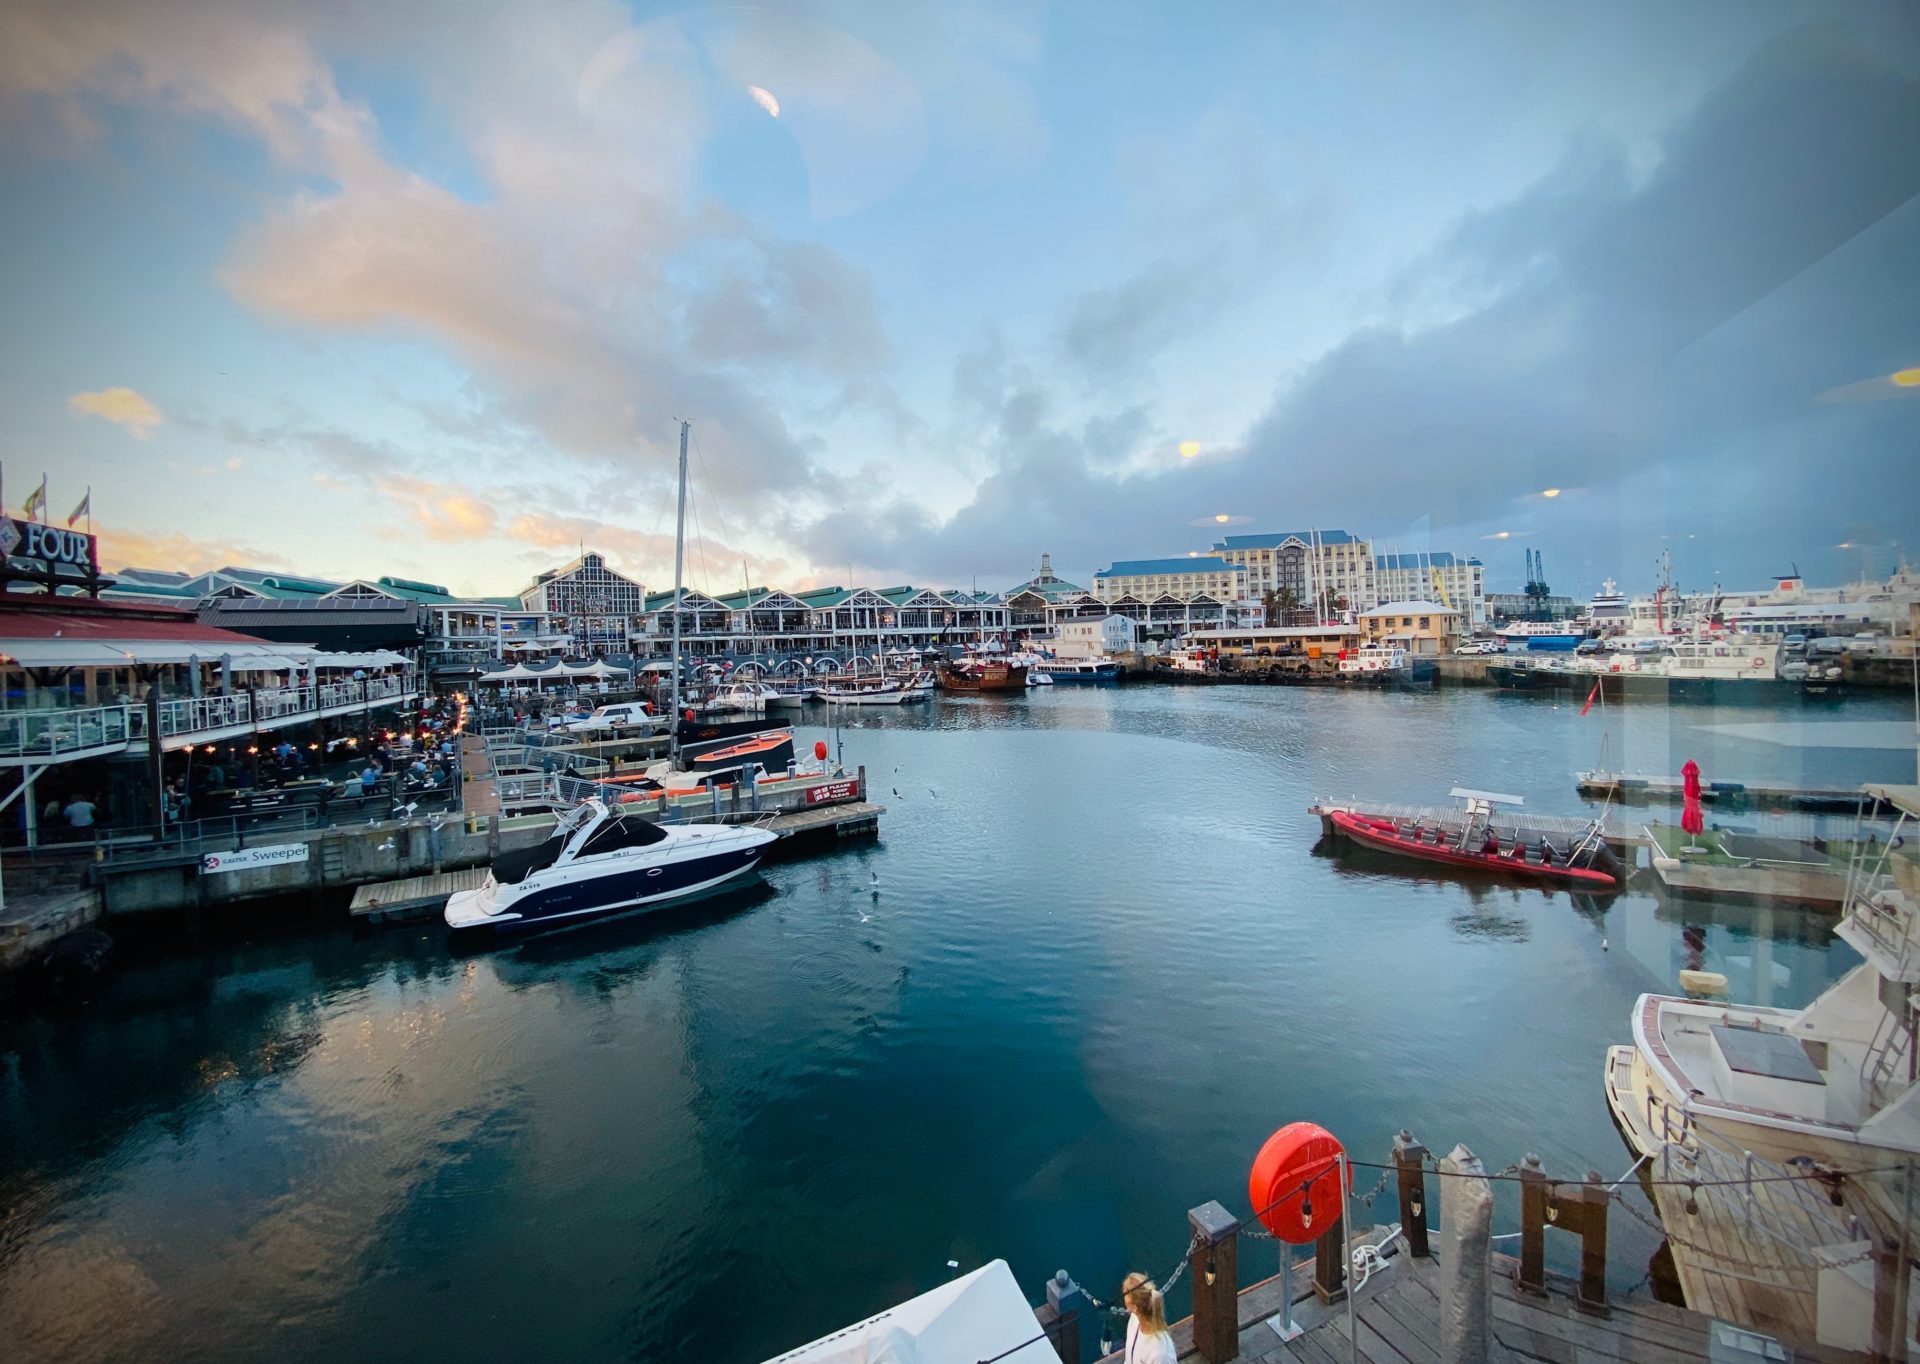 Victoria Alfred Waterfront, Cape Town